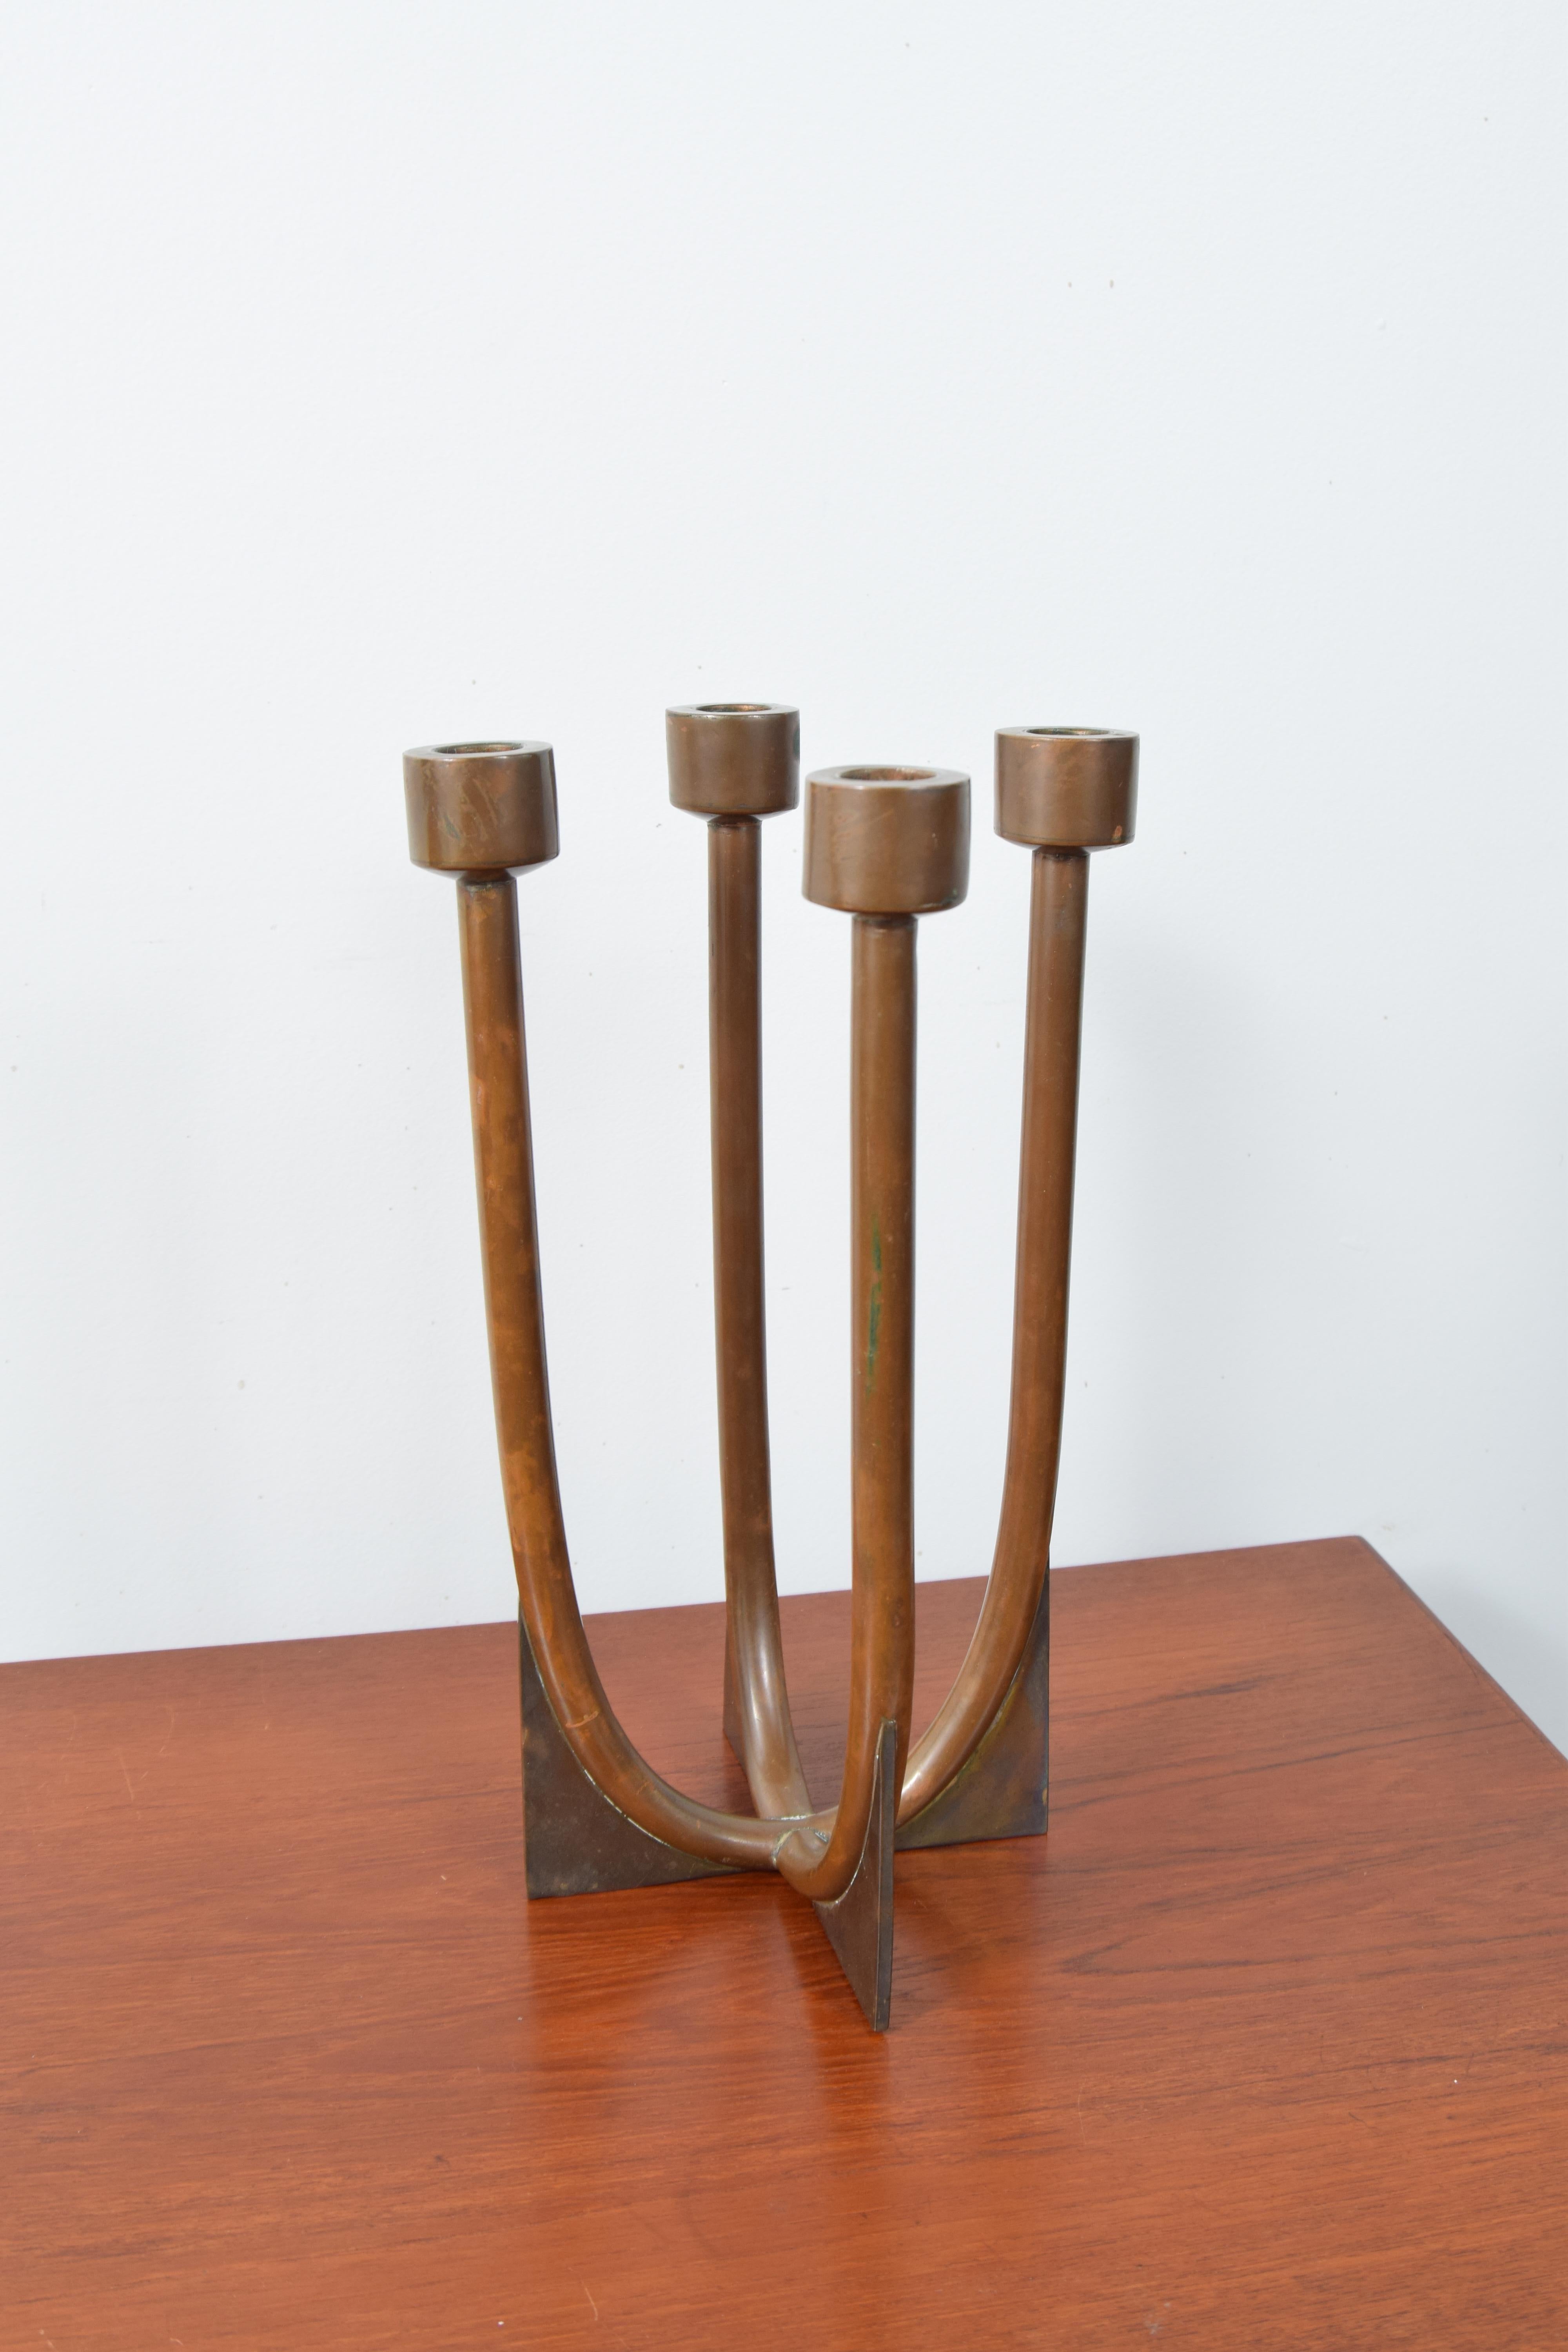 Copper and brass candelabra by legendary Taxco, Mexico Silversmith Antoñio Pineda, circa 1953. Fully signed with the 